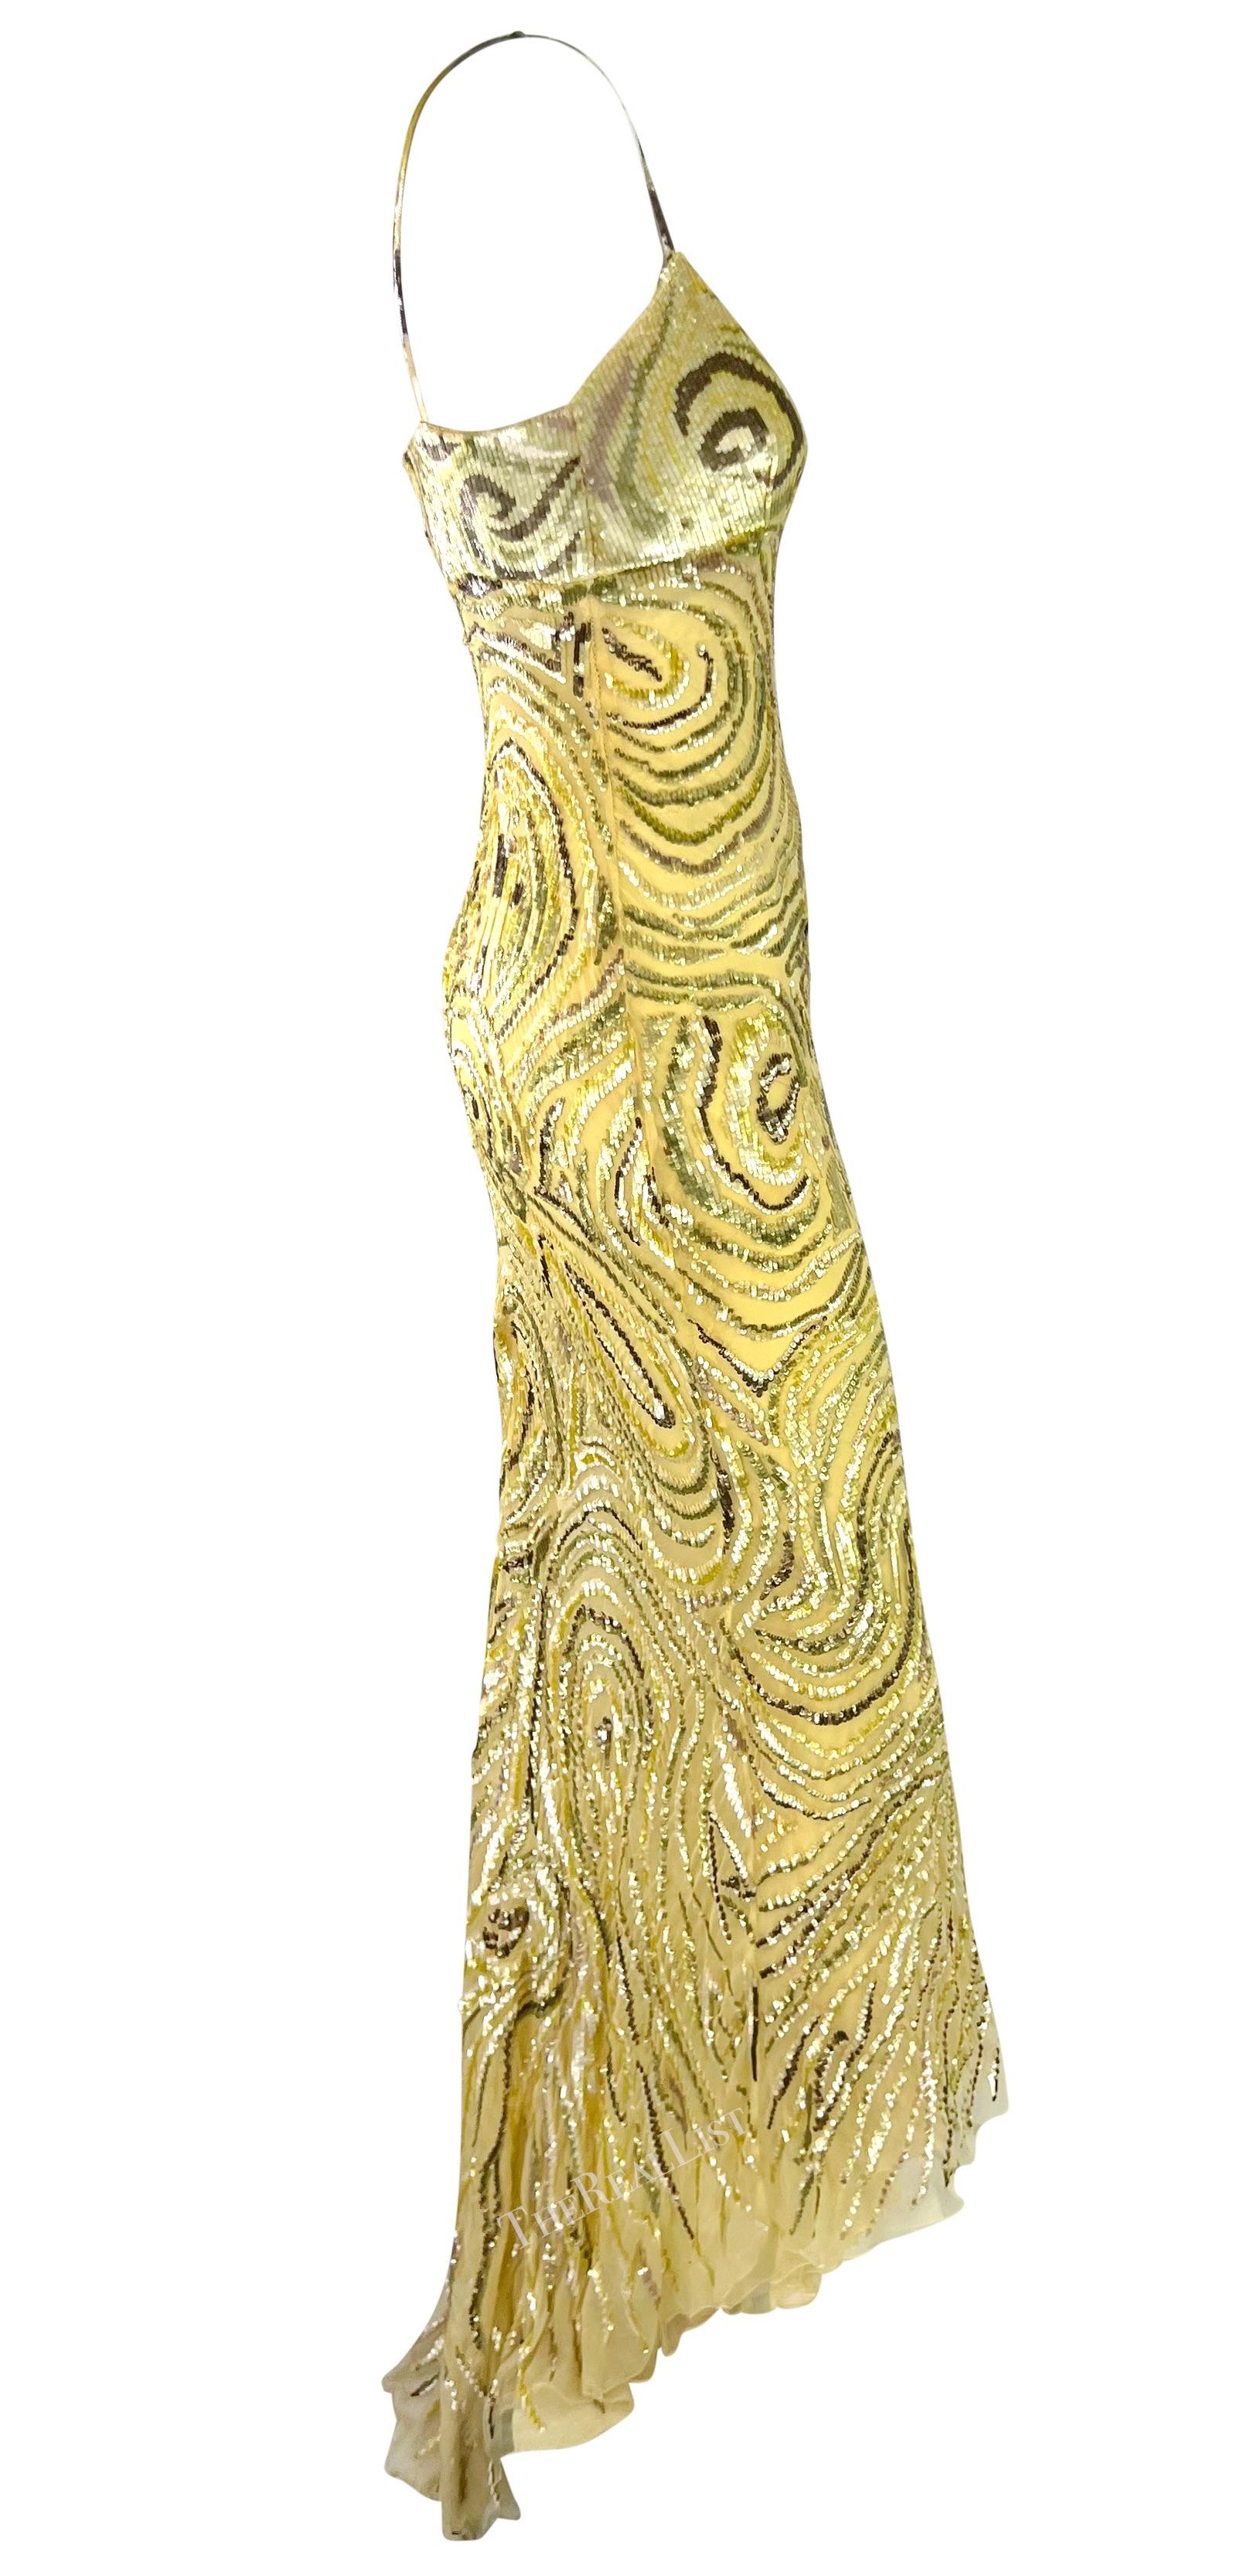 S/S 1997 Valentino Garavani Runway Naomi Abstract Organic Form Sequin Gown For Sale 14